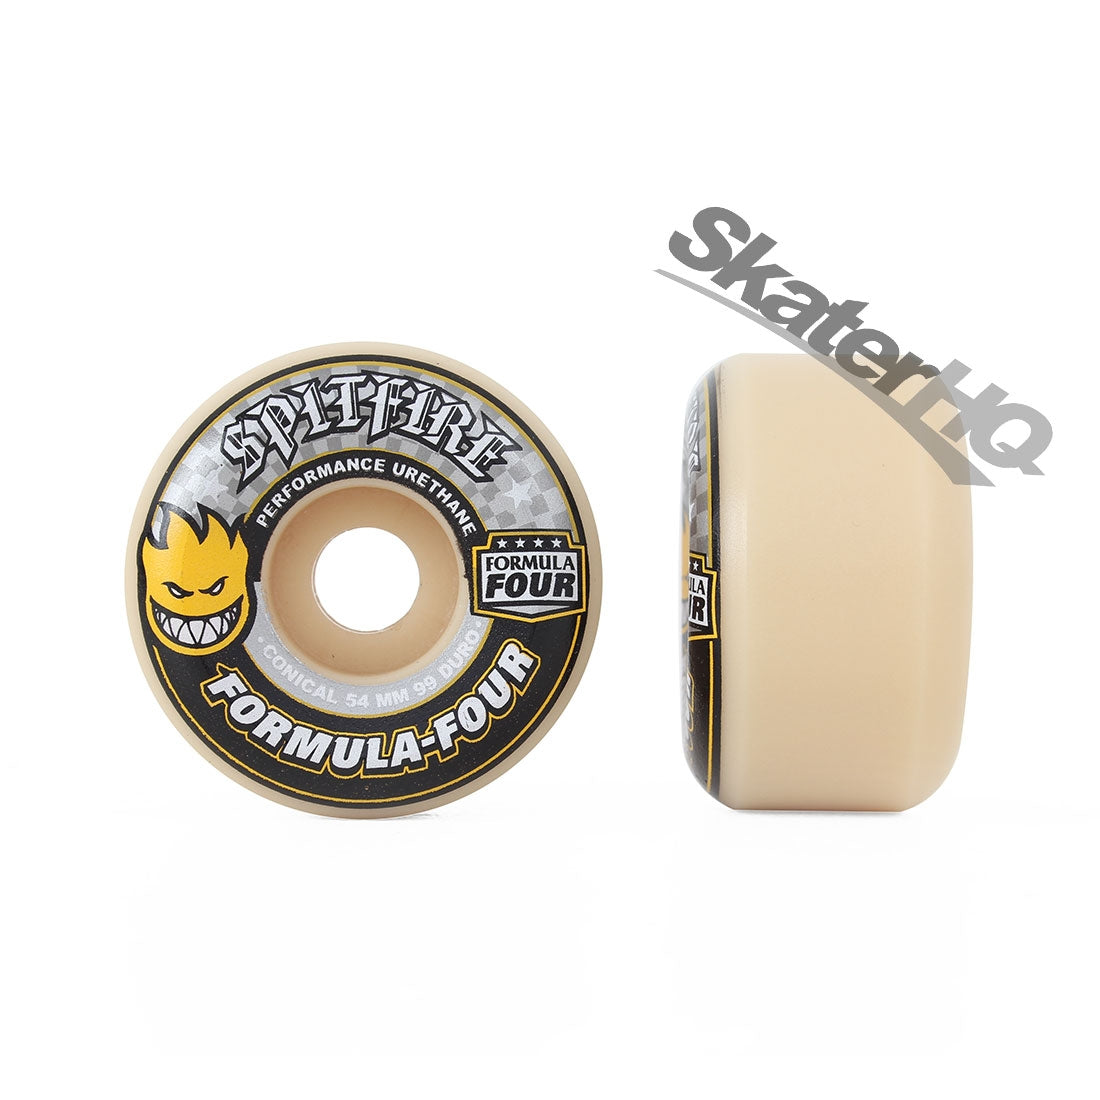 Spitfire Form Four 54mm 99A Conical - Yellow Skateboard Wheels